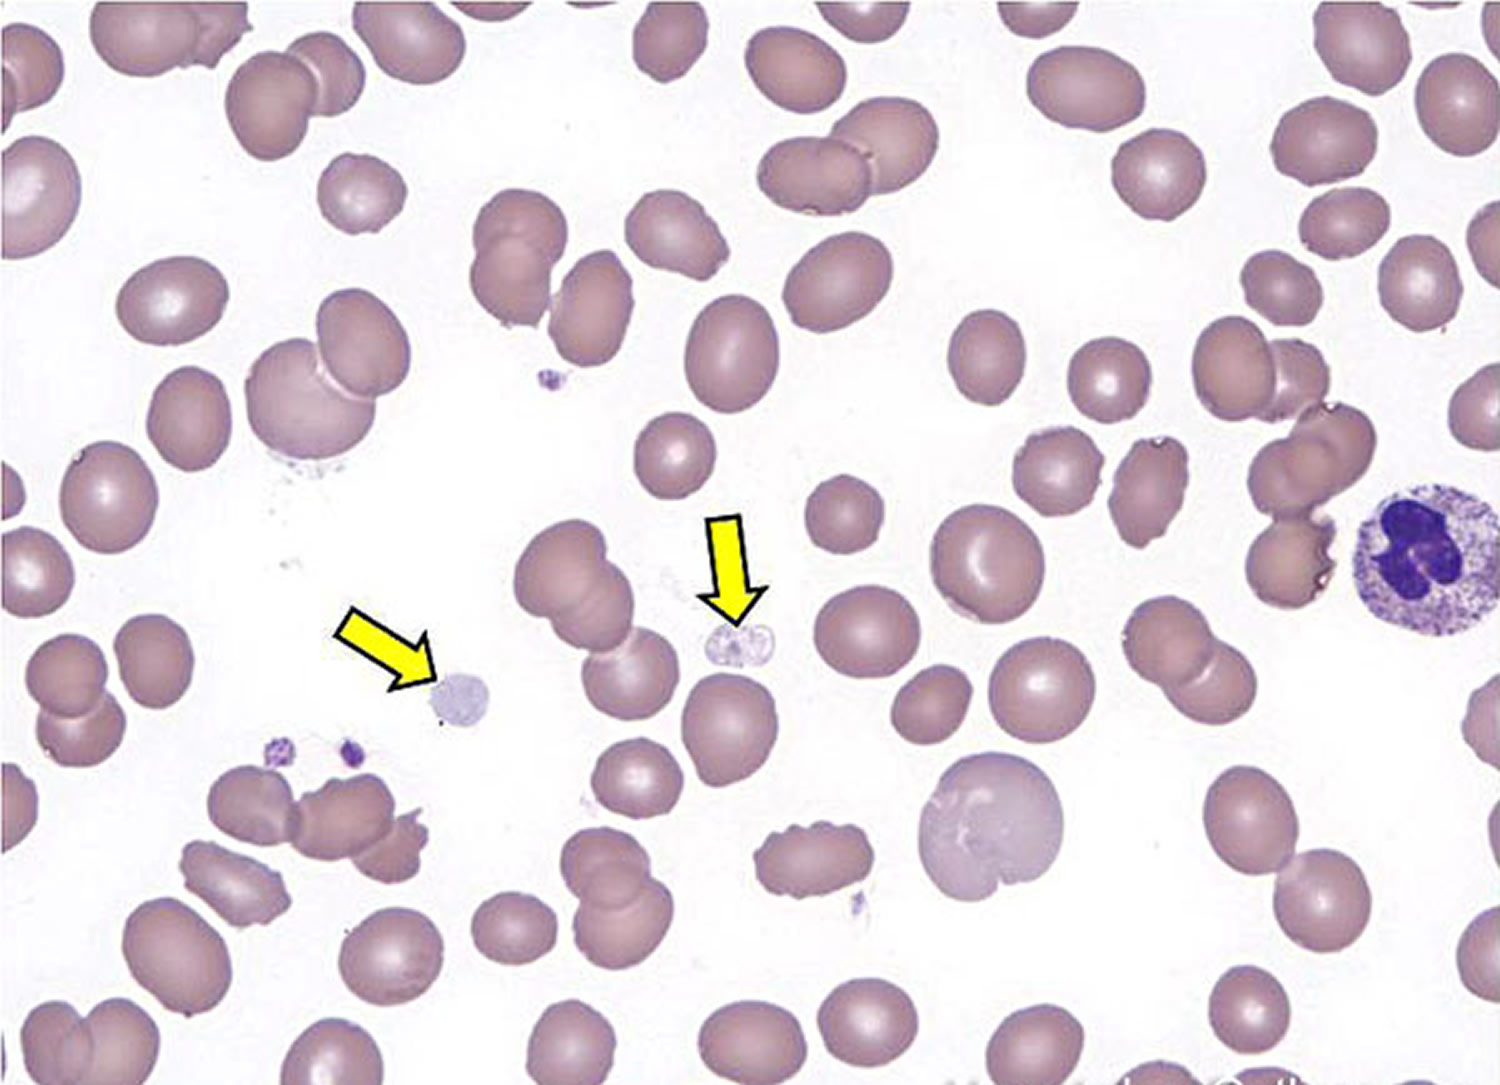 Platelet Count - High & Low Platelet Count, Causes & Treatment